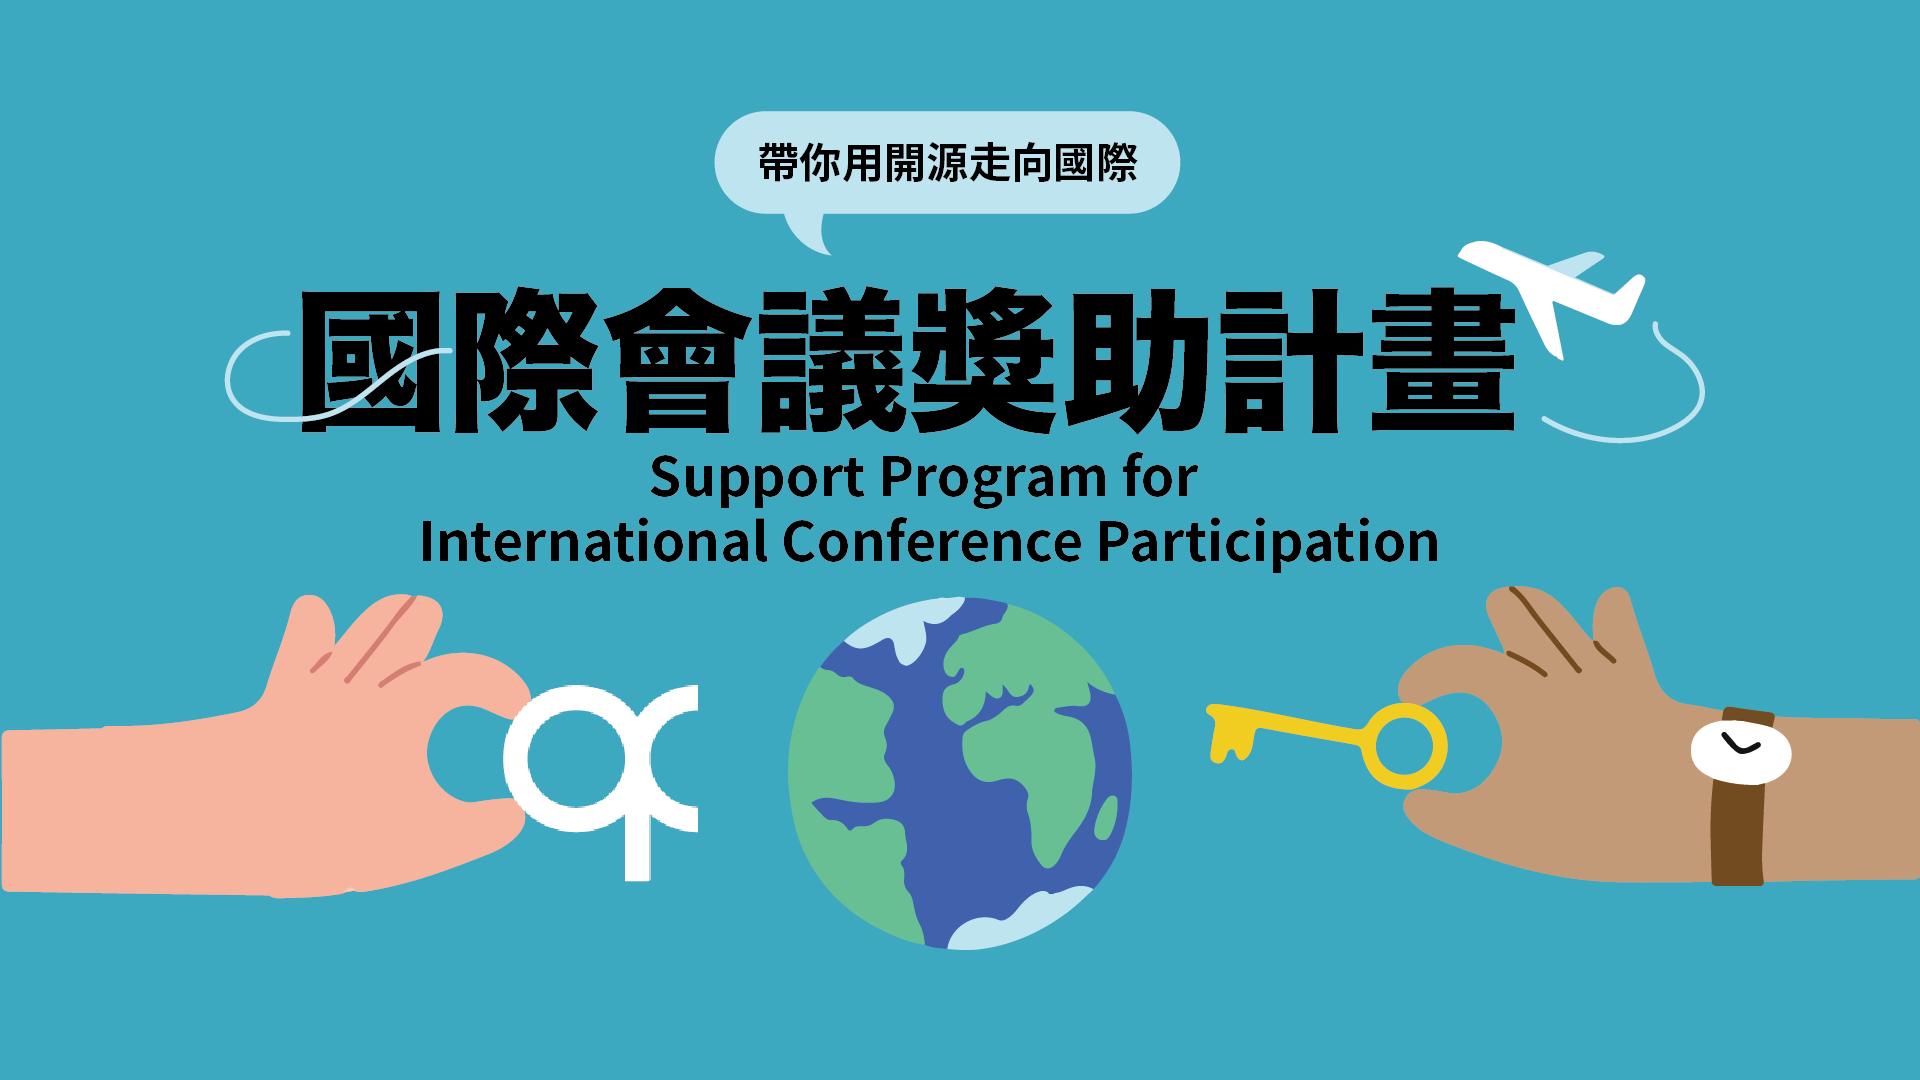 Visual identity image for 'Support Program for International Conference Participation'